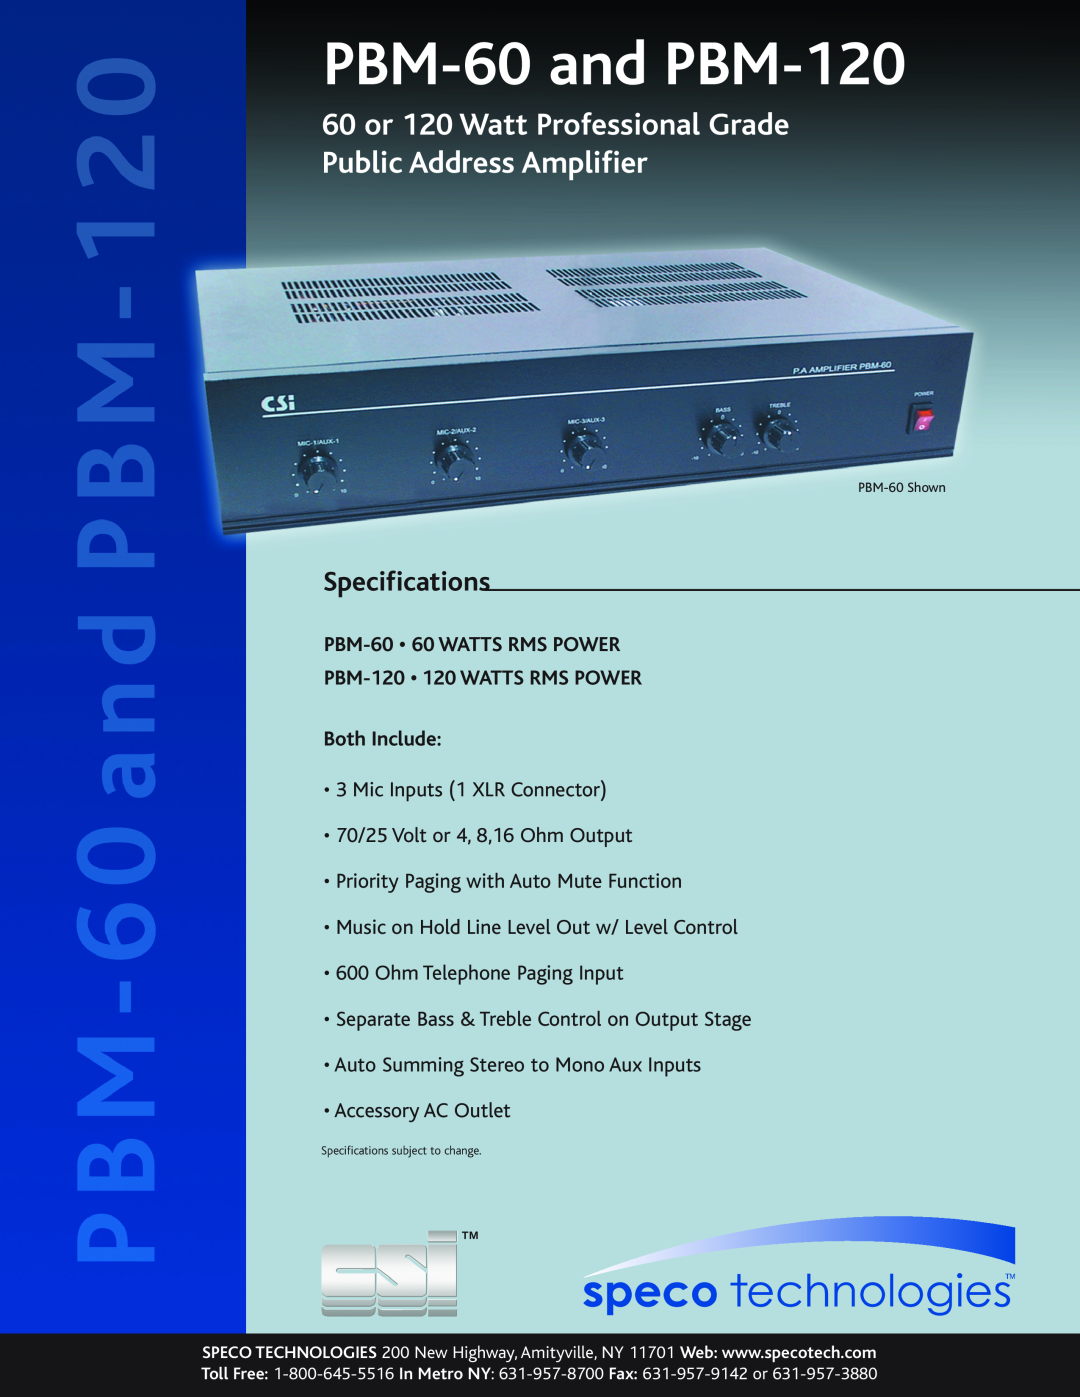 Speco Technologies specifications PBM-60and PBM-120, Specifications, PBM-60 60 WATTS RMS POWER 